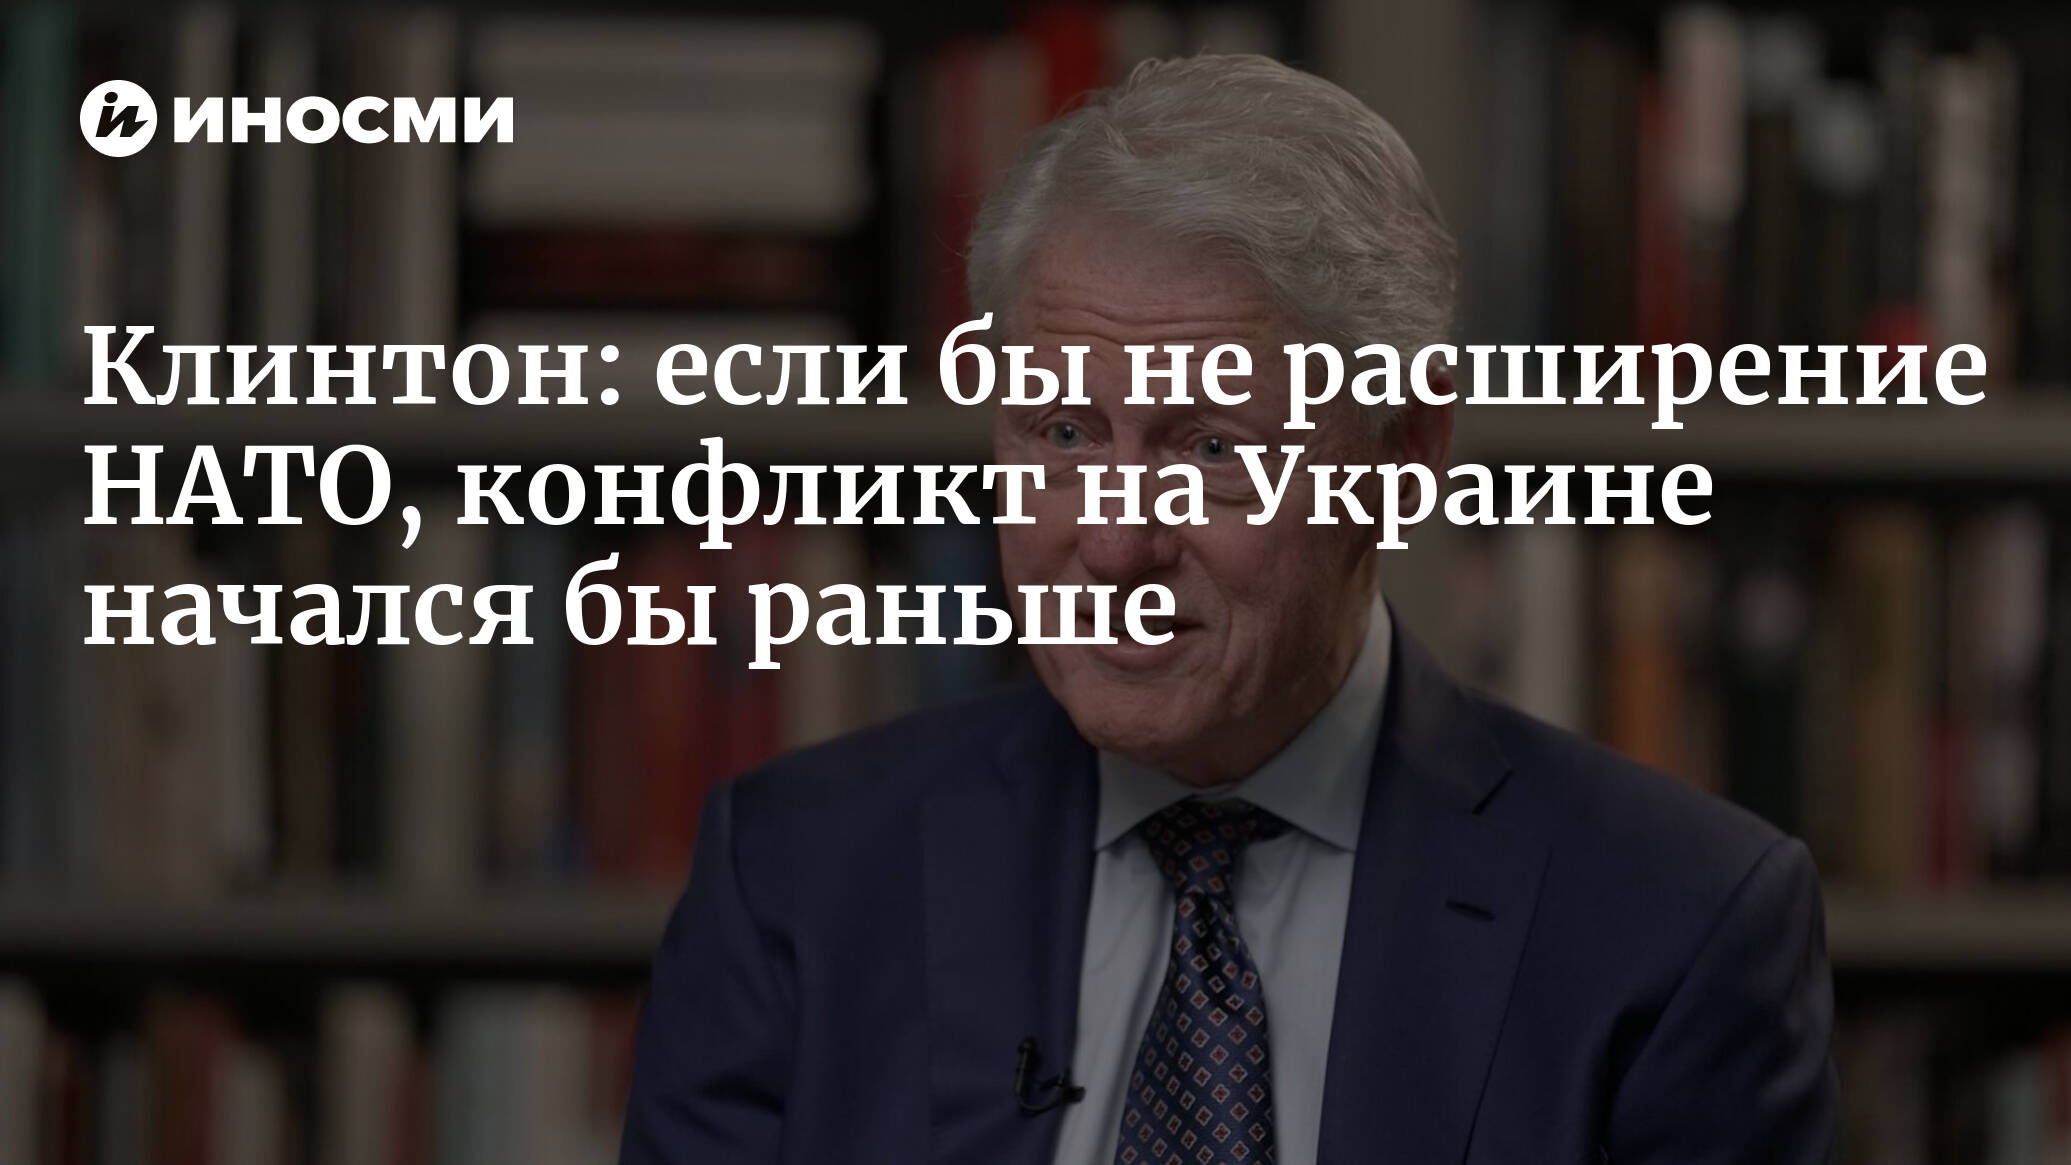 Bill Clinton: If not for NATO expansion, the conflict in Ukraine would have started earlier